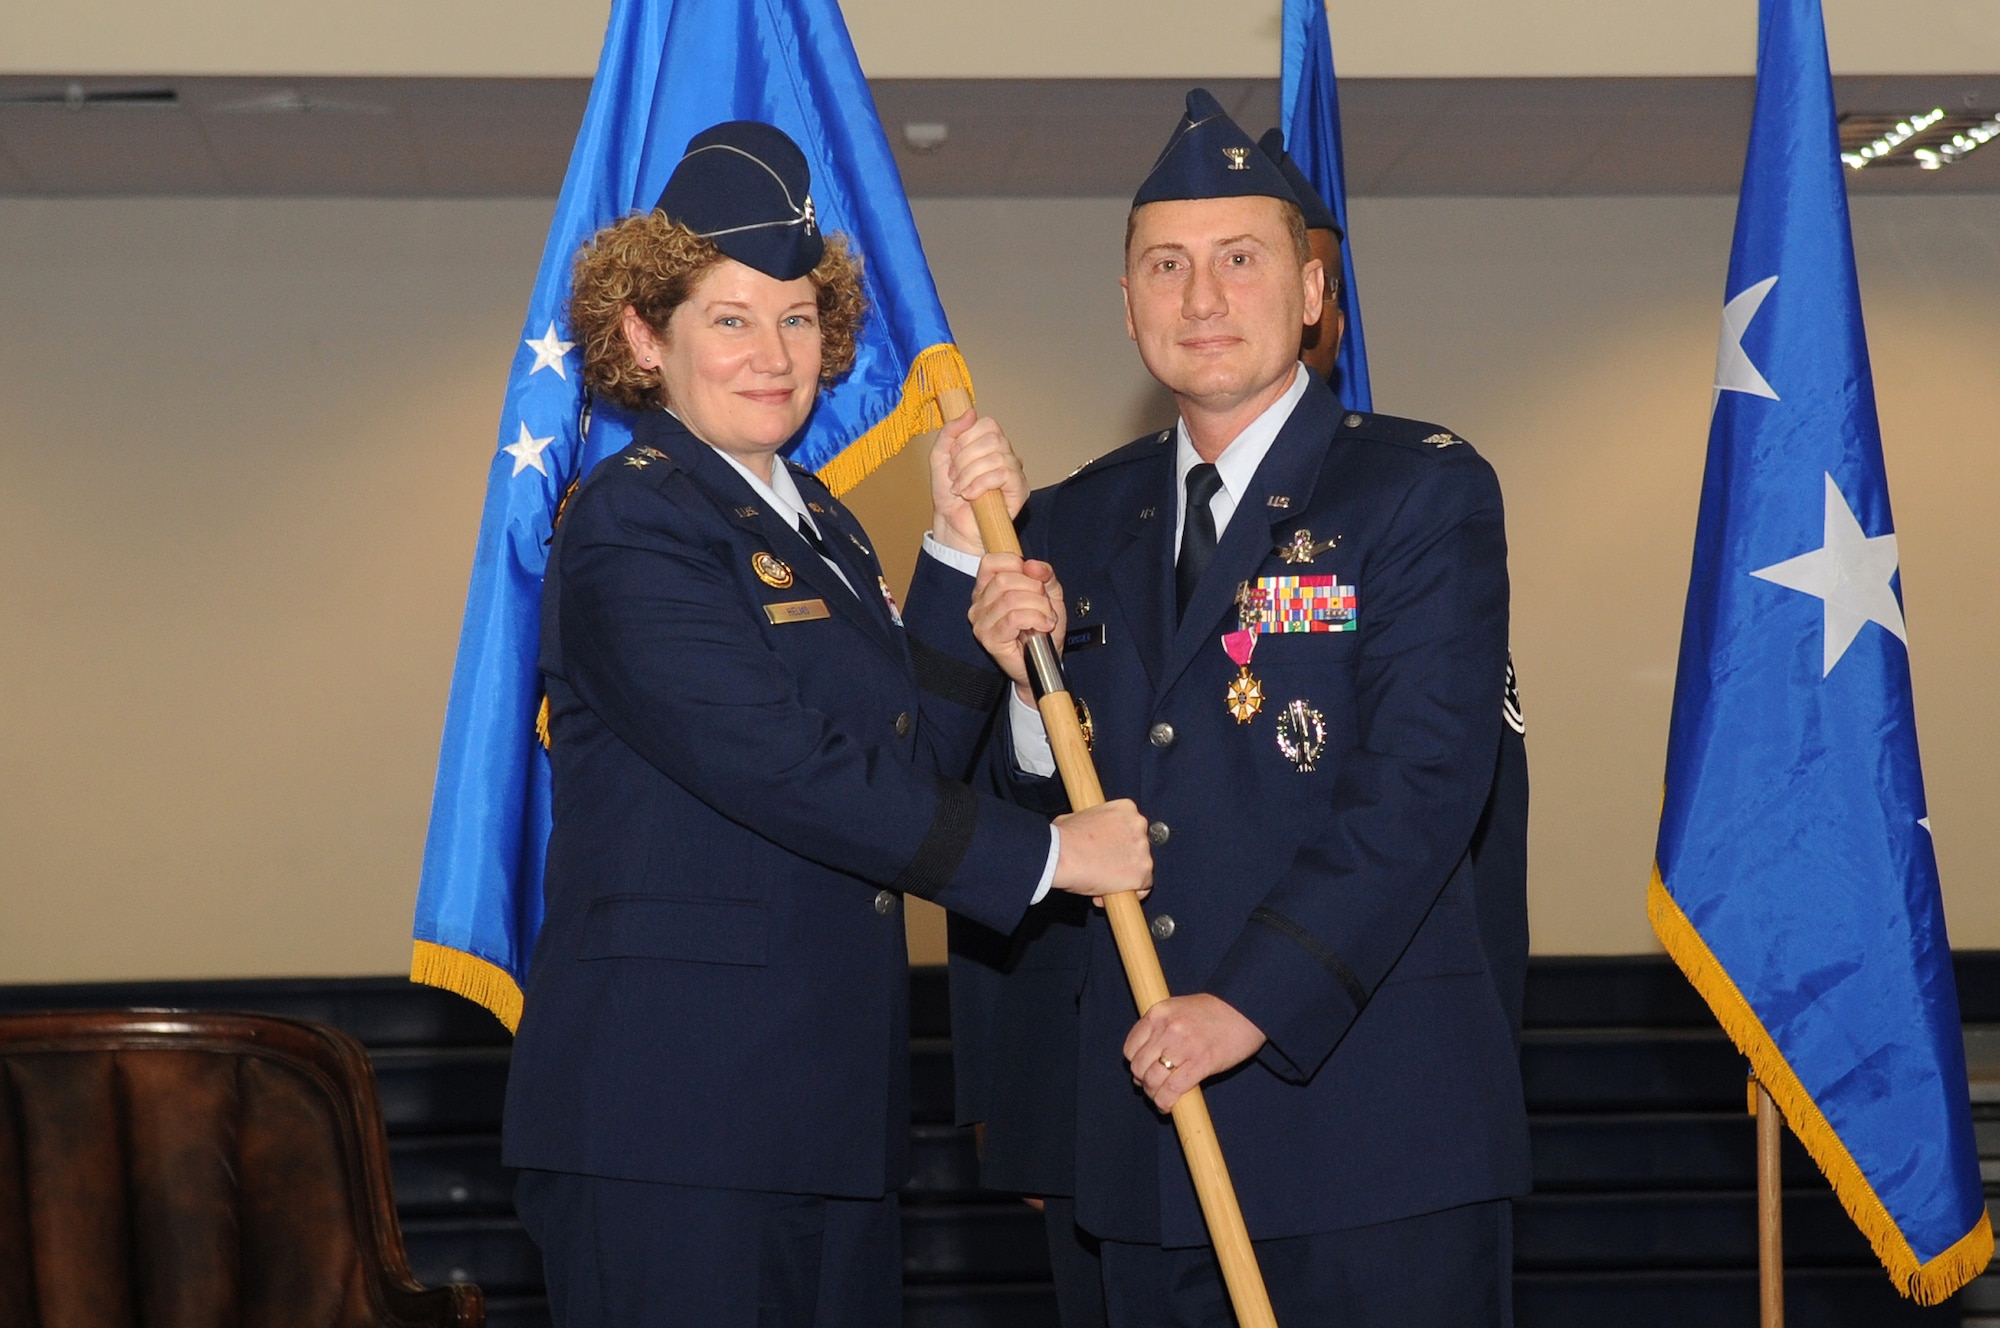 BUCKLEY AIR FORCE BASE, Colo.-- 460th Space Wing Commander, Col. Clint Crosier, passes the Air Force flag to the 14th Air Force Commander, Lt. Gen. Susan Helms, during his reliquishment of command ceremony at the Buckley Fitness Center April 25, 2011. Col. Trent Pickering, will take his place as base commander. (U.S. Air Force photo by Airman Manisha Vasquez)